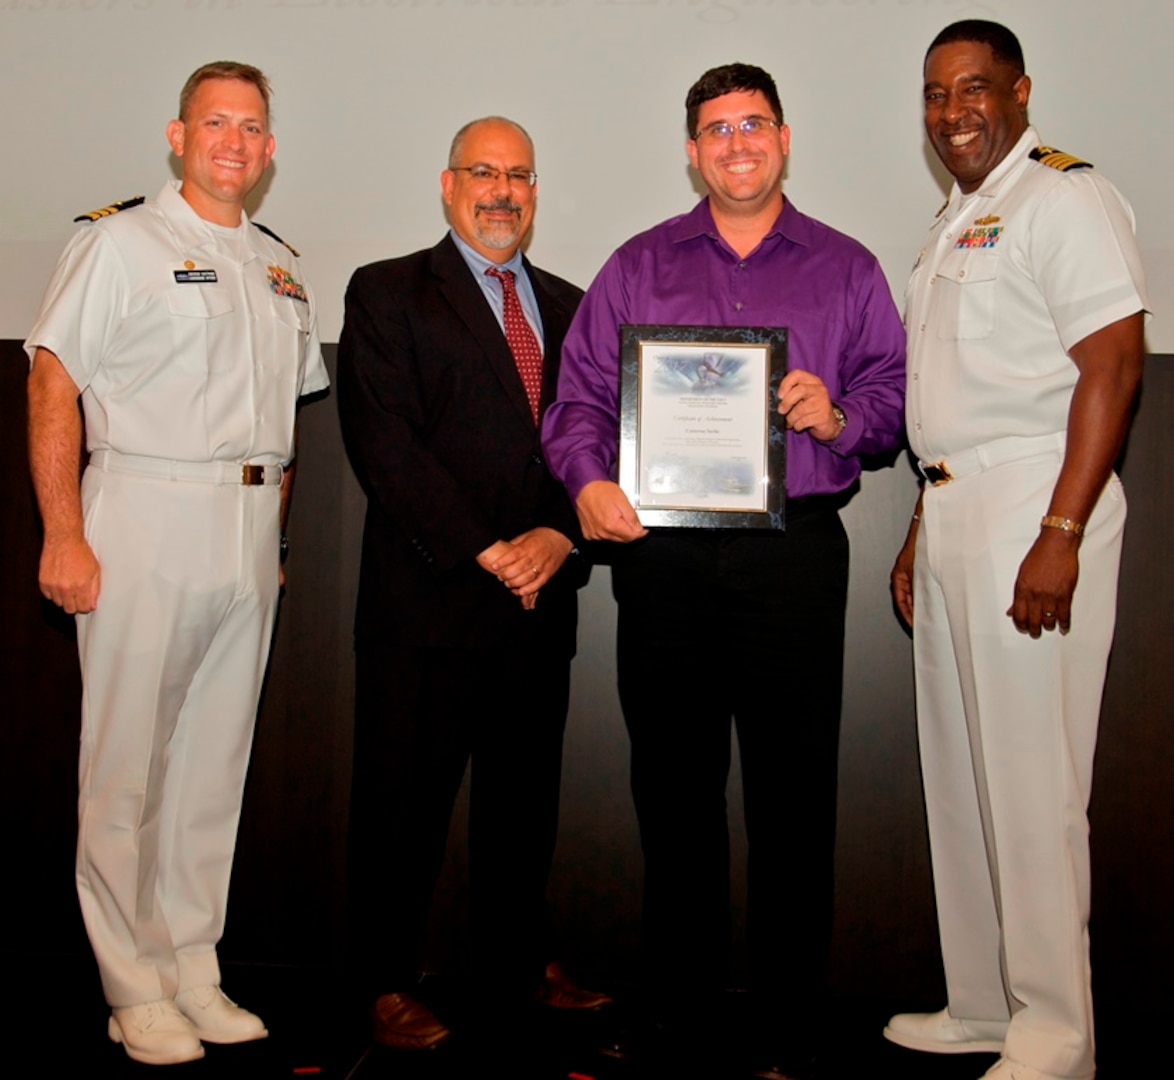 IMAGE: DAHLGREN, Va. - Cameron Sorlie receives his certificate of achievement from Naval Surface Warfare Center Dahlgren Division (NSWCDD) Technical Director John Fiore, NSWCDD Commanding Officer Capt. Godfrey 'Gus' Weekes, right, and Combat Direction Systems Activity Dam Neck Commanding Officer Cmdr. Andrew Hoffman at the 2017 NSWCDD academic awards ceremony. Sorlie was recognized for completing his master's in electrical engineering from John Hopkins University, and commended for his commitment to personal and professional development.